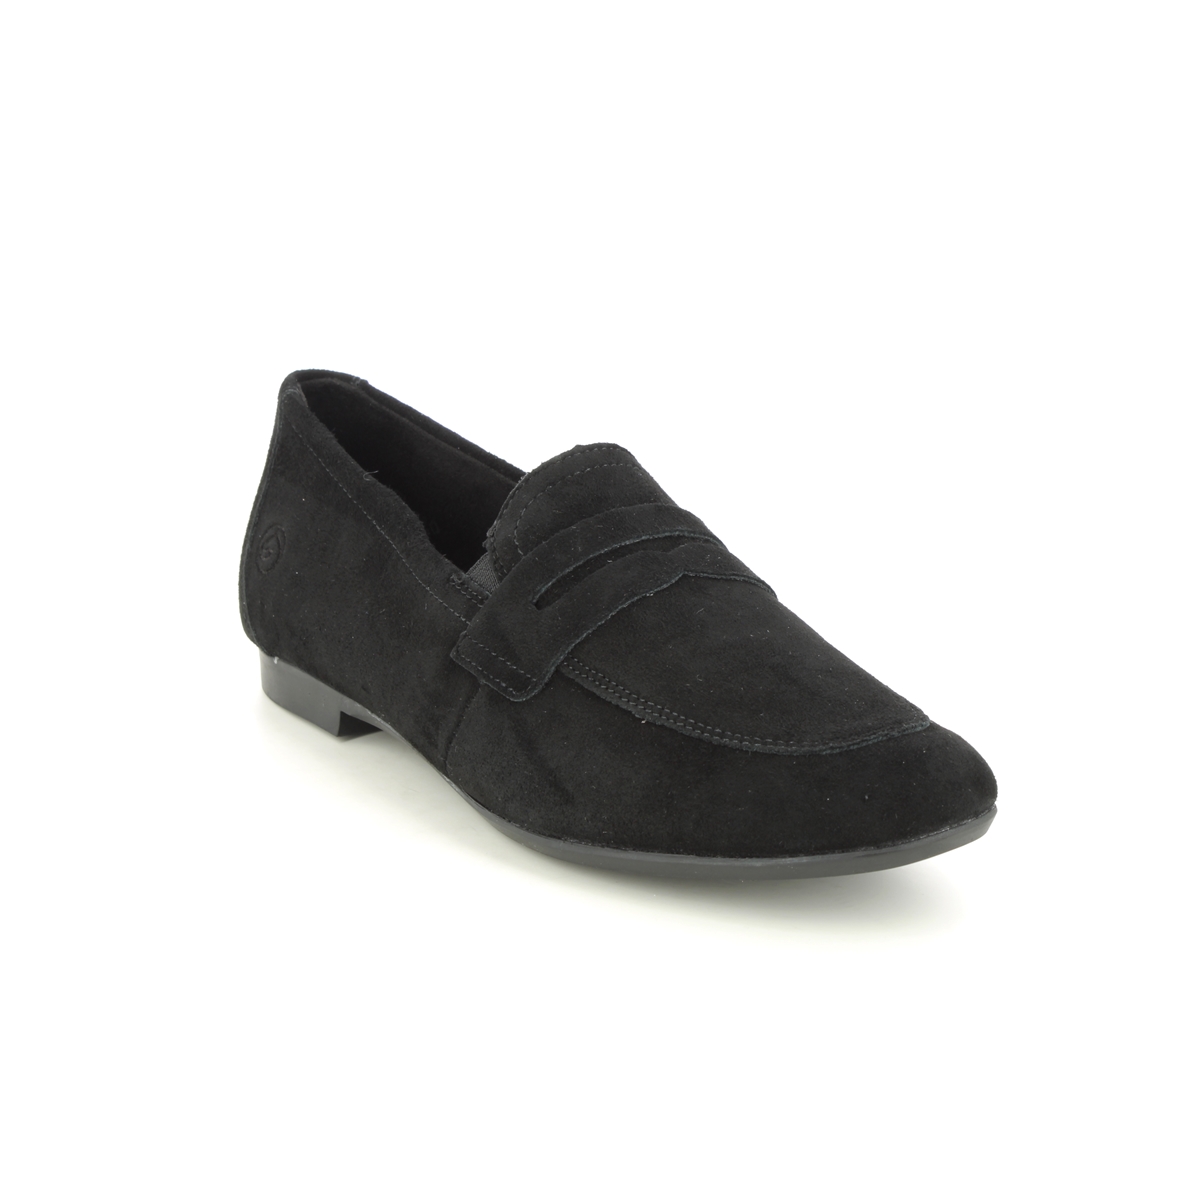 Remonte D0K02-00 Viva Penny Black Suede Womens loafers in a Plain Leather in Size 41